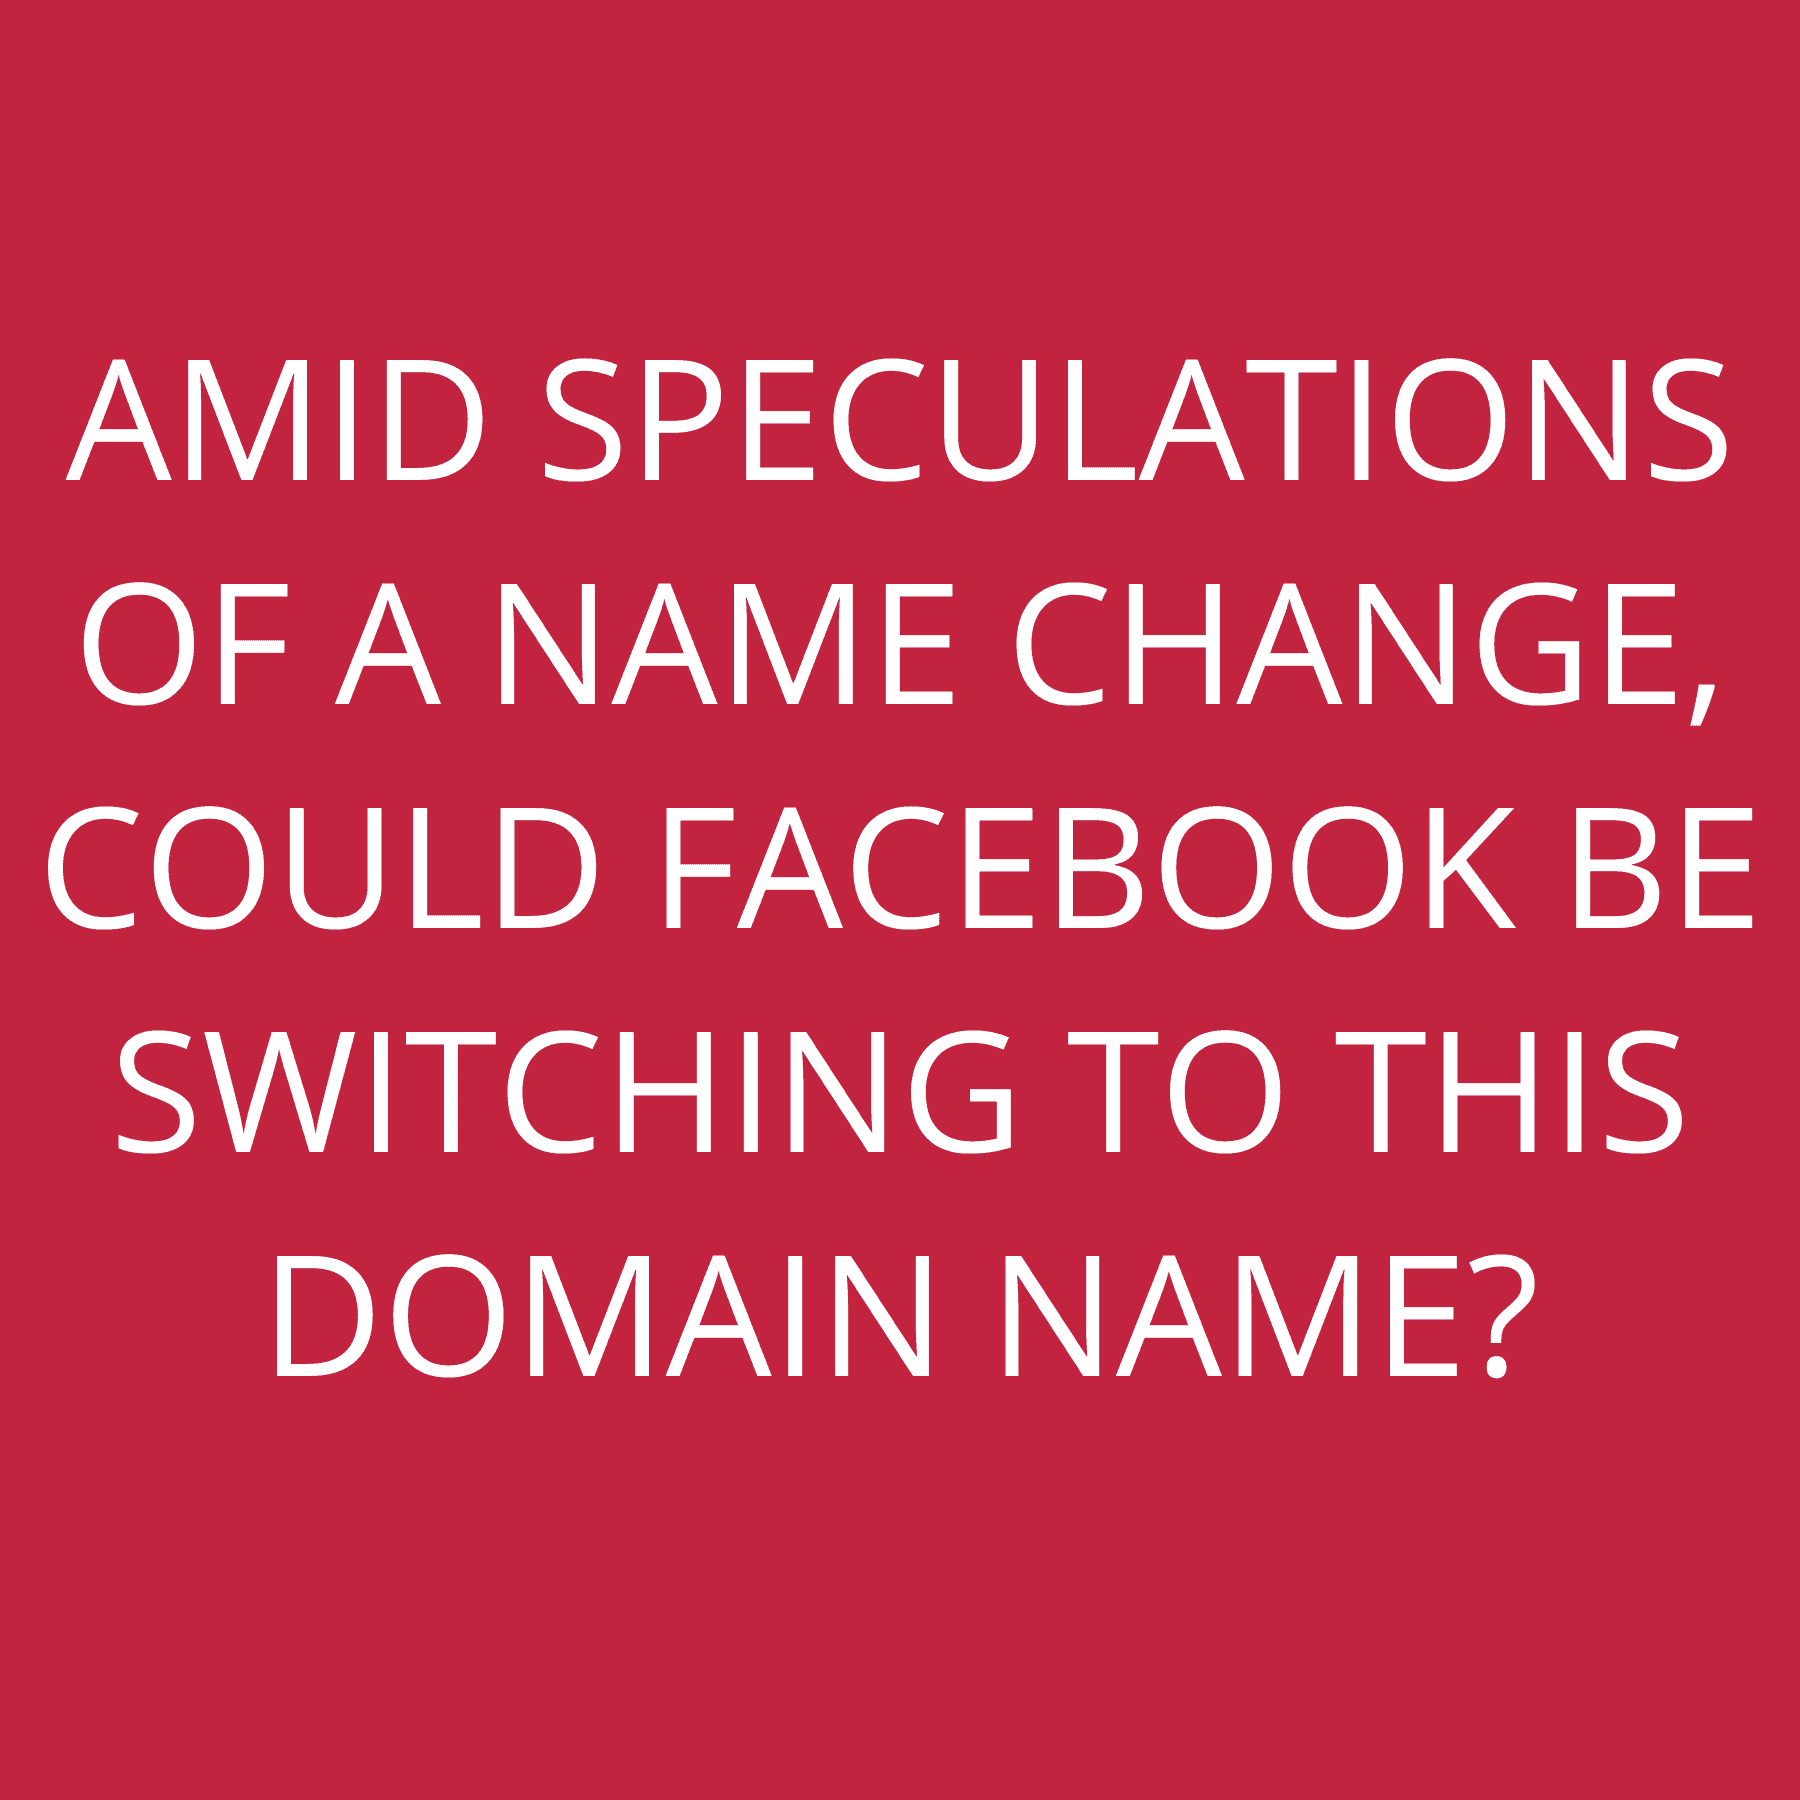 Amid speculations of a name change, could Facebook be switching TO this domain name?